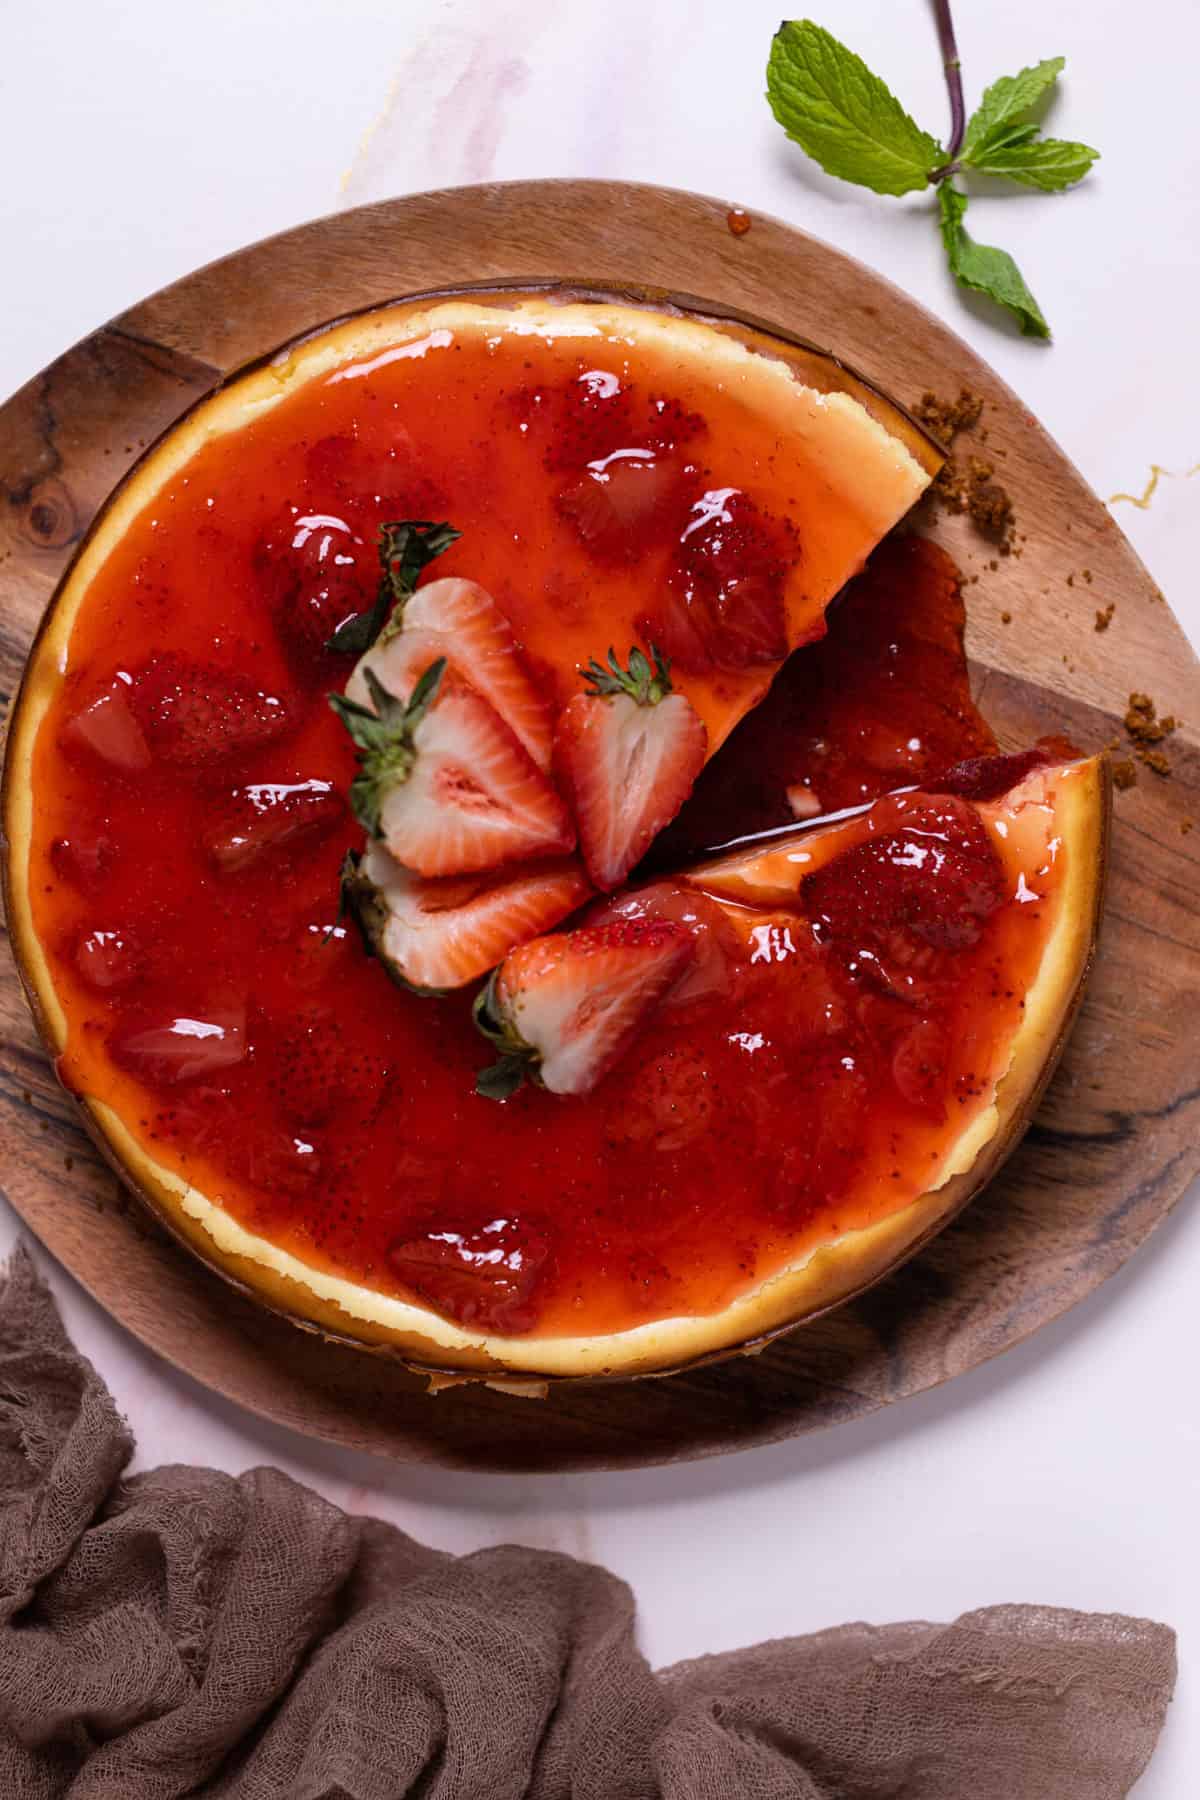 New York-Style Cheesecake topped with strawberries and strawberry sauce.